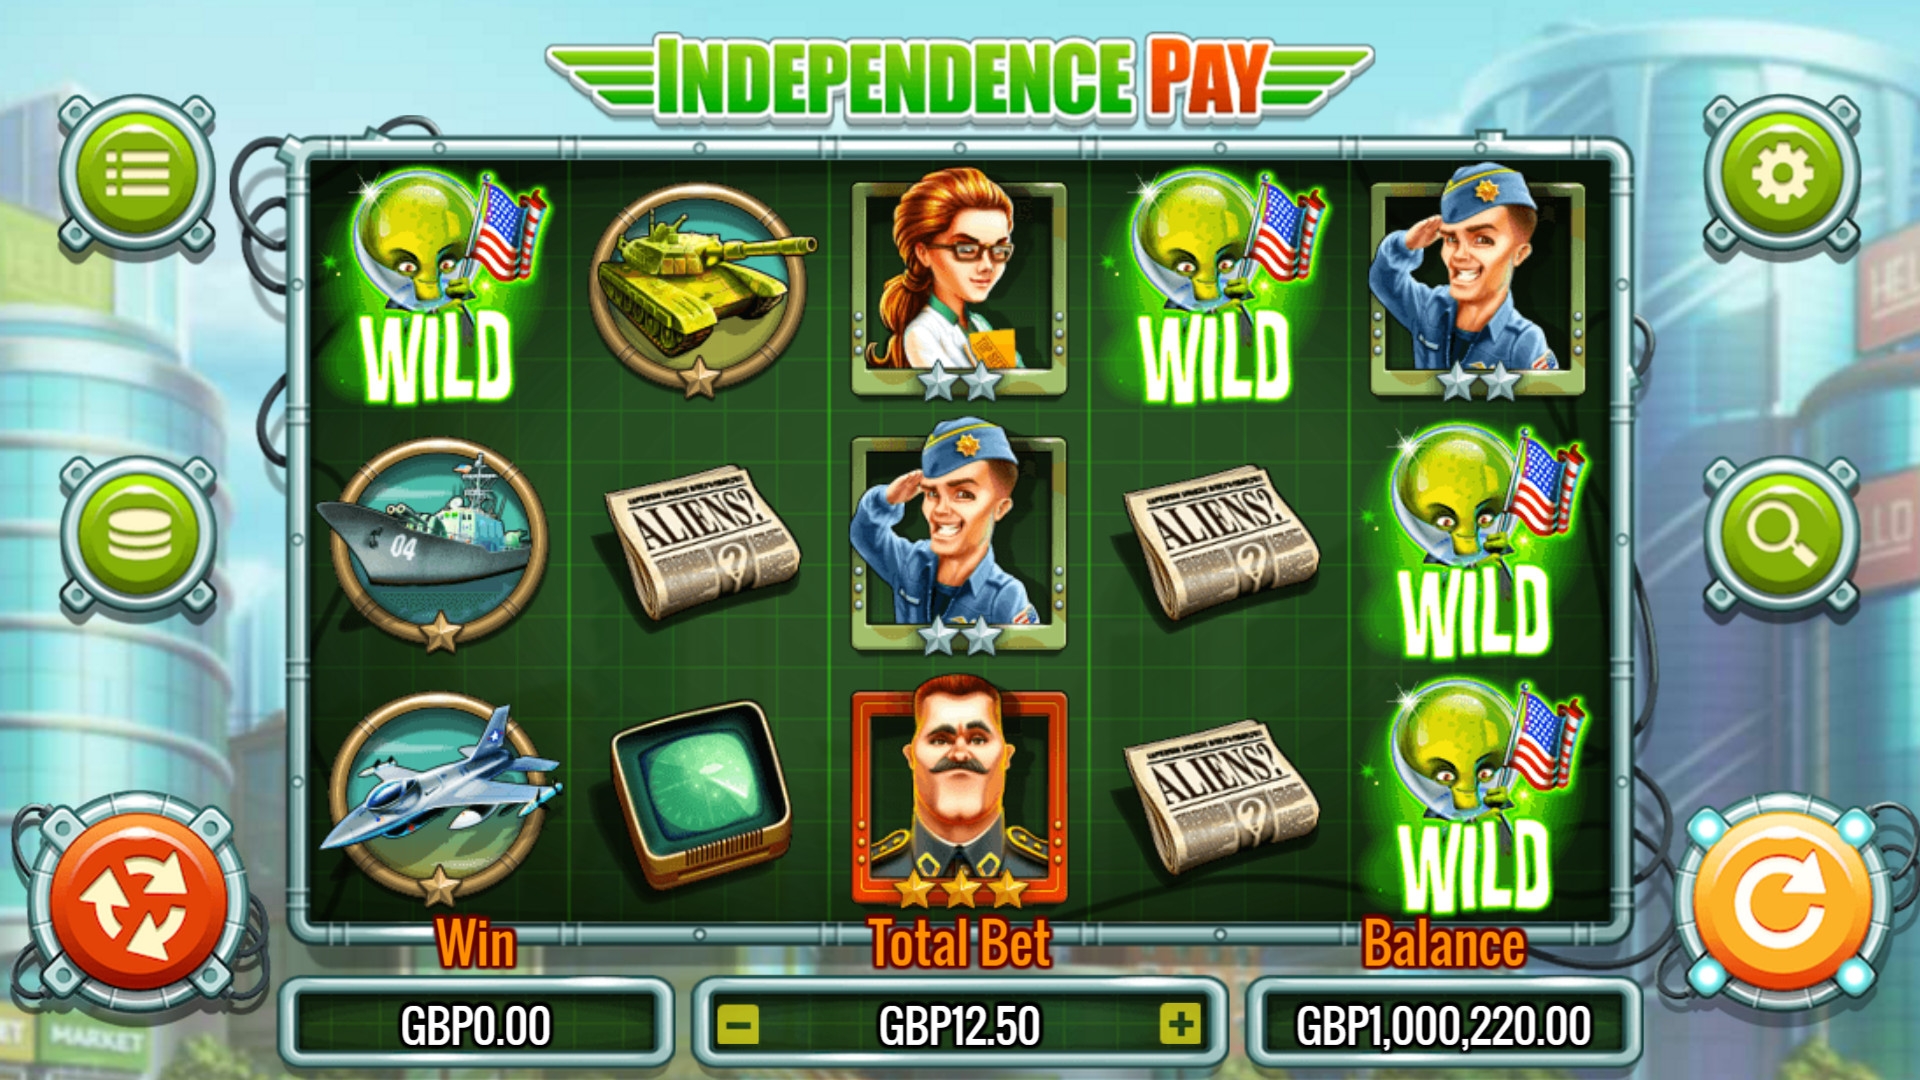 Independence Pay (Independence Pay) from category Slots